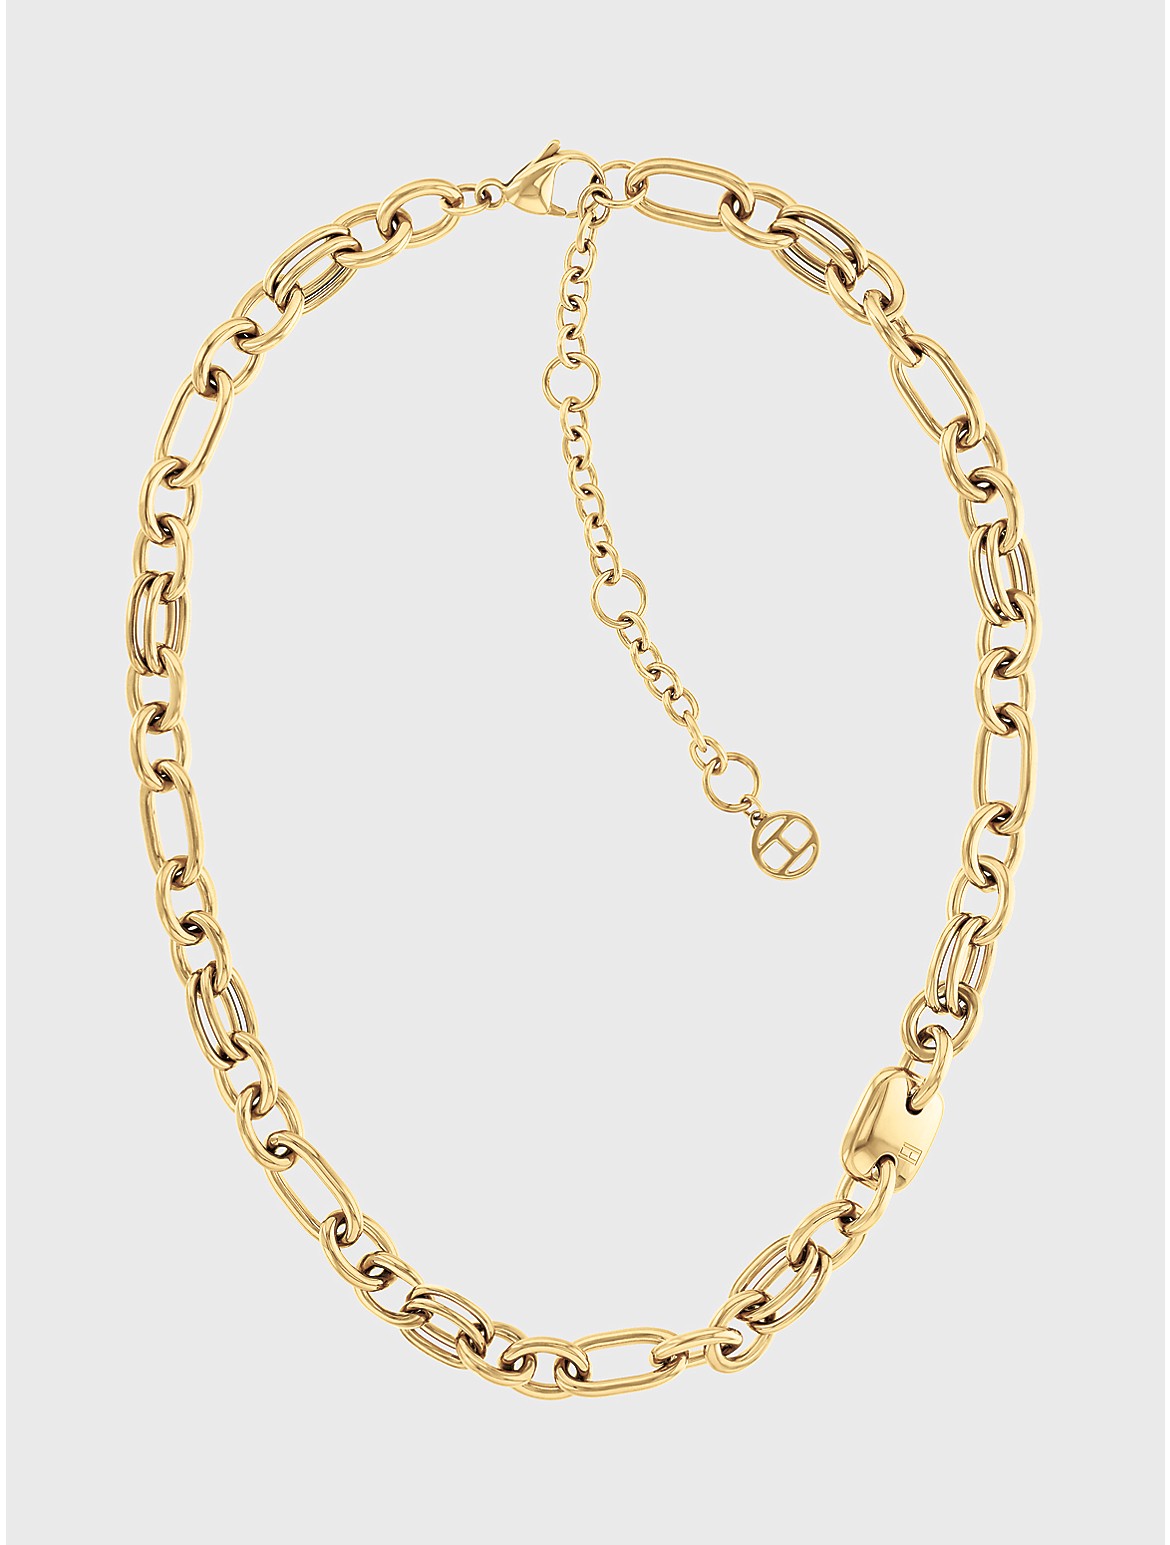 Tommy Hilfiger Women's Mixed Chain Link Gold-Tone Necklace